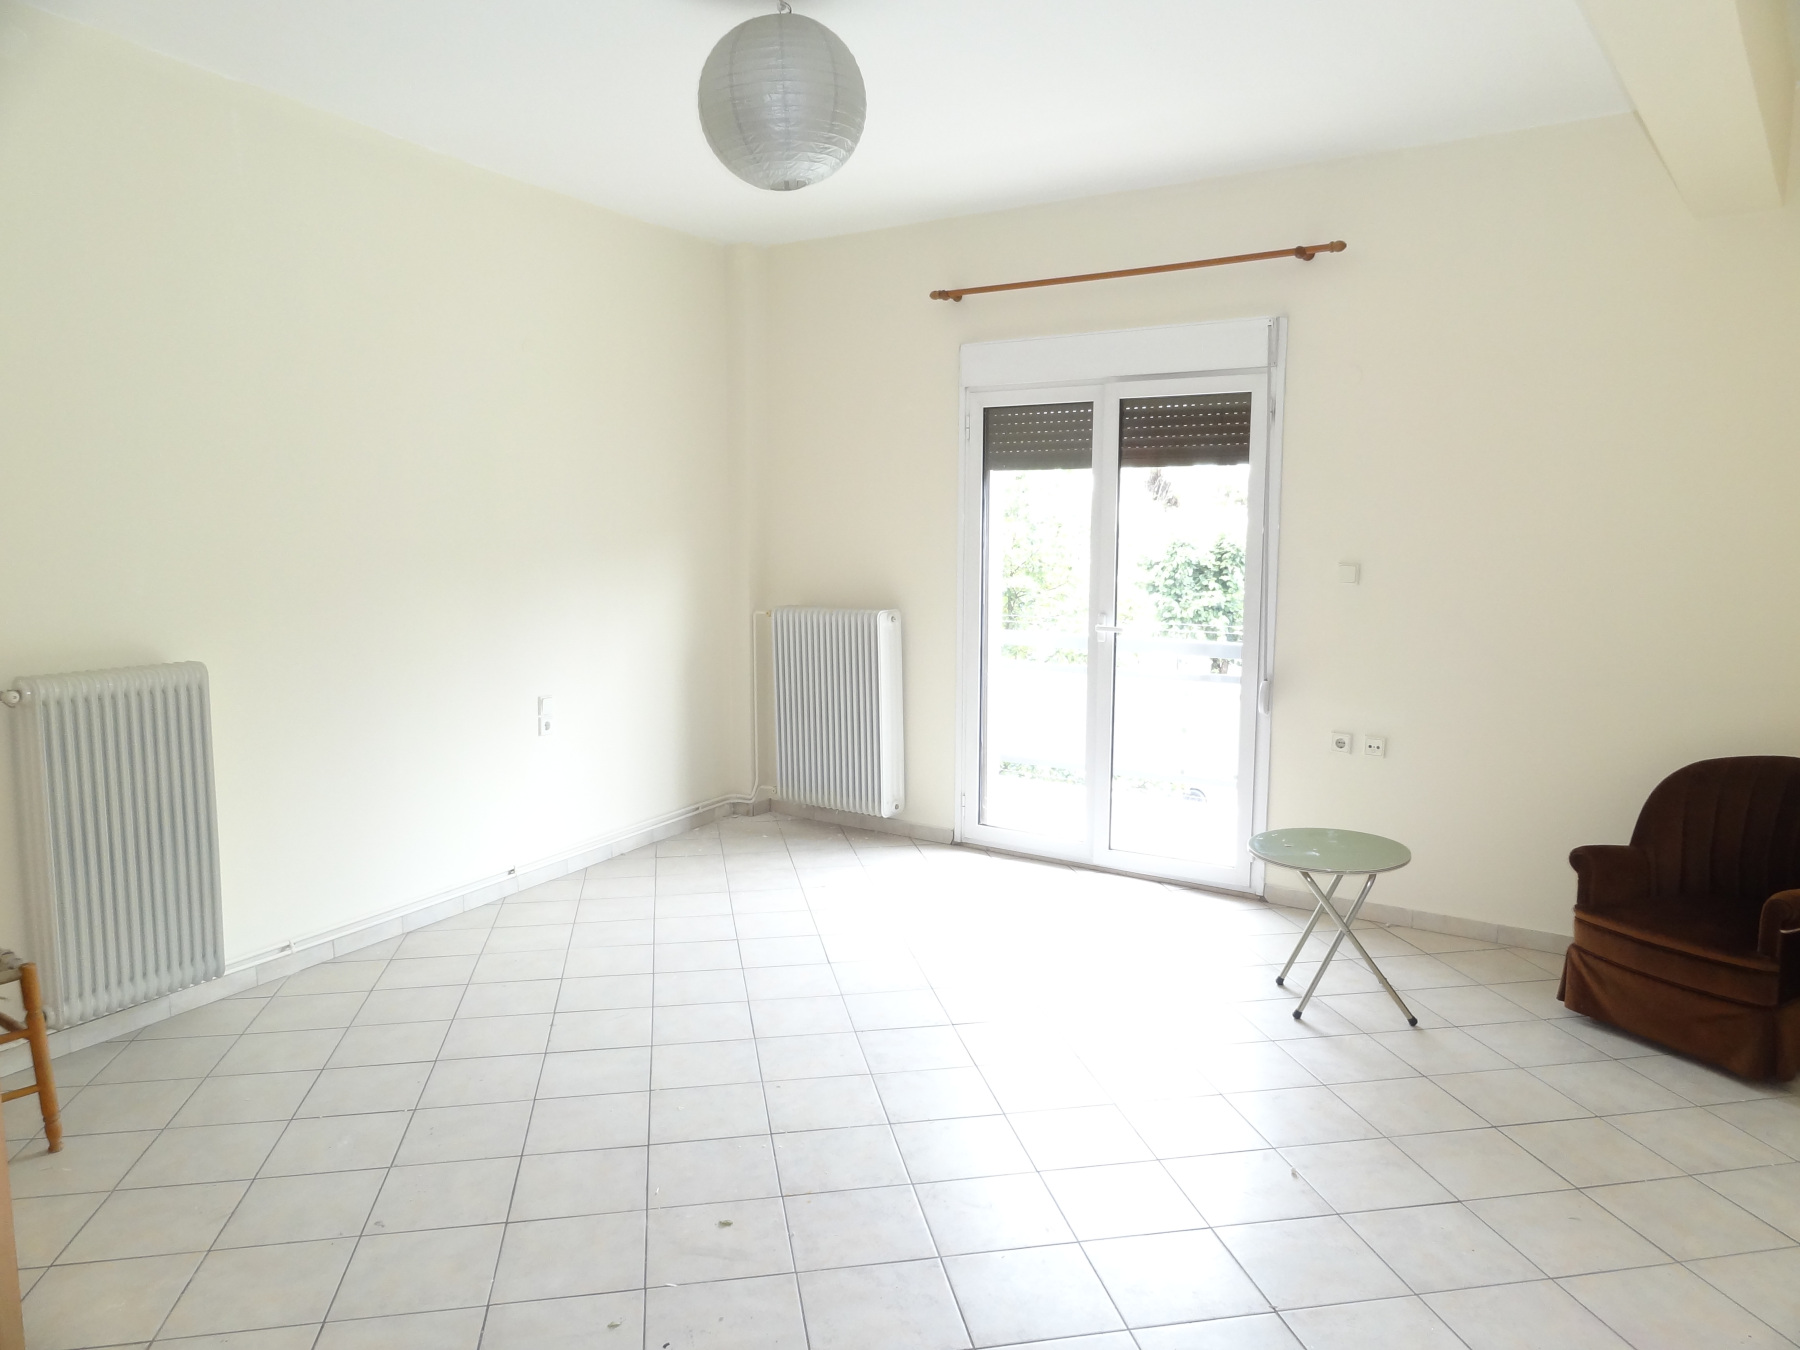 For rent studio 42 sq.m. 1st floor in the center of Ioannina in the area of the Academy